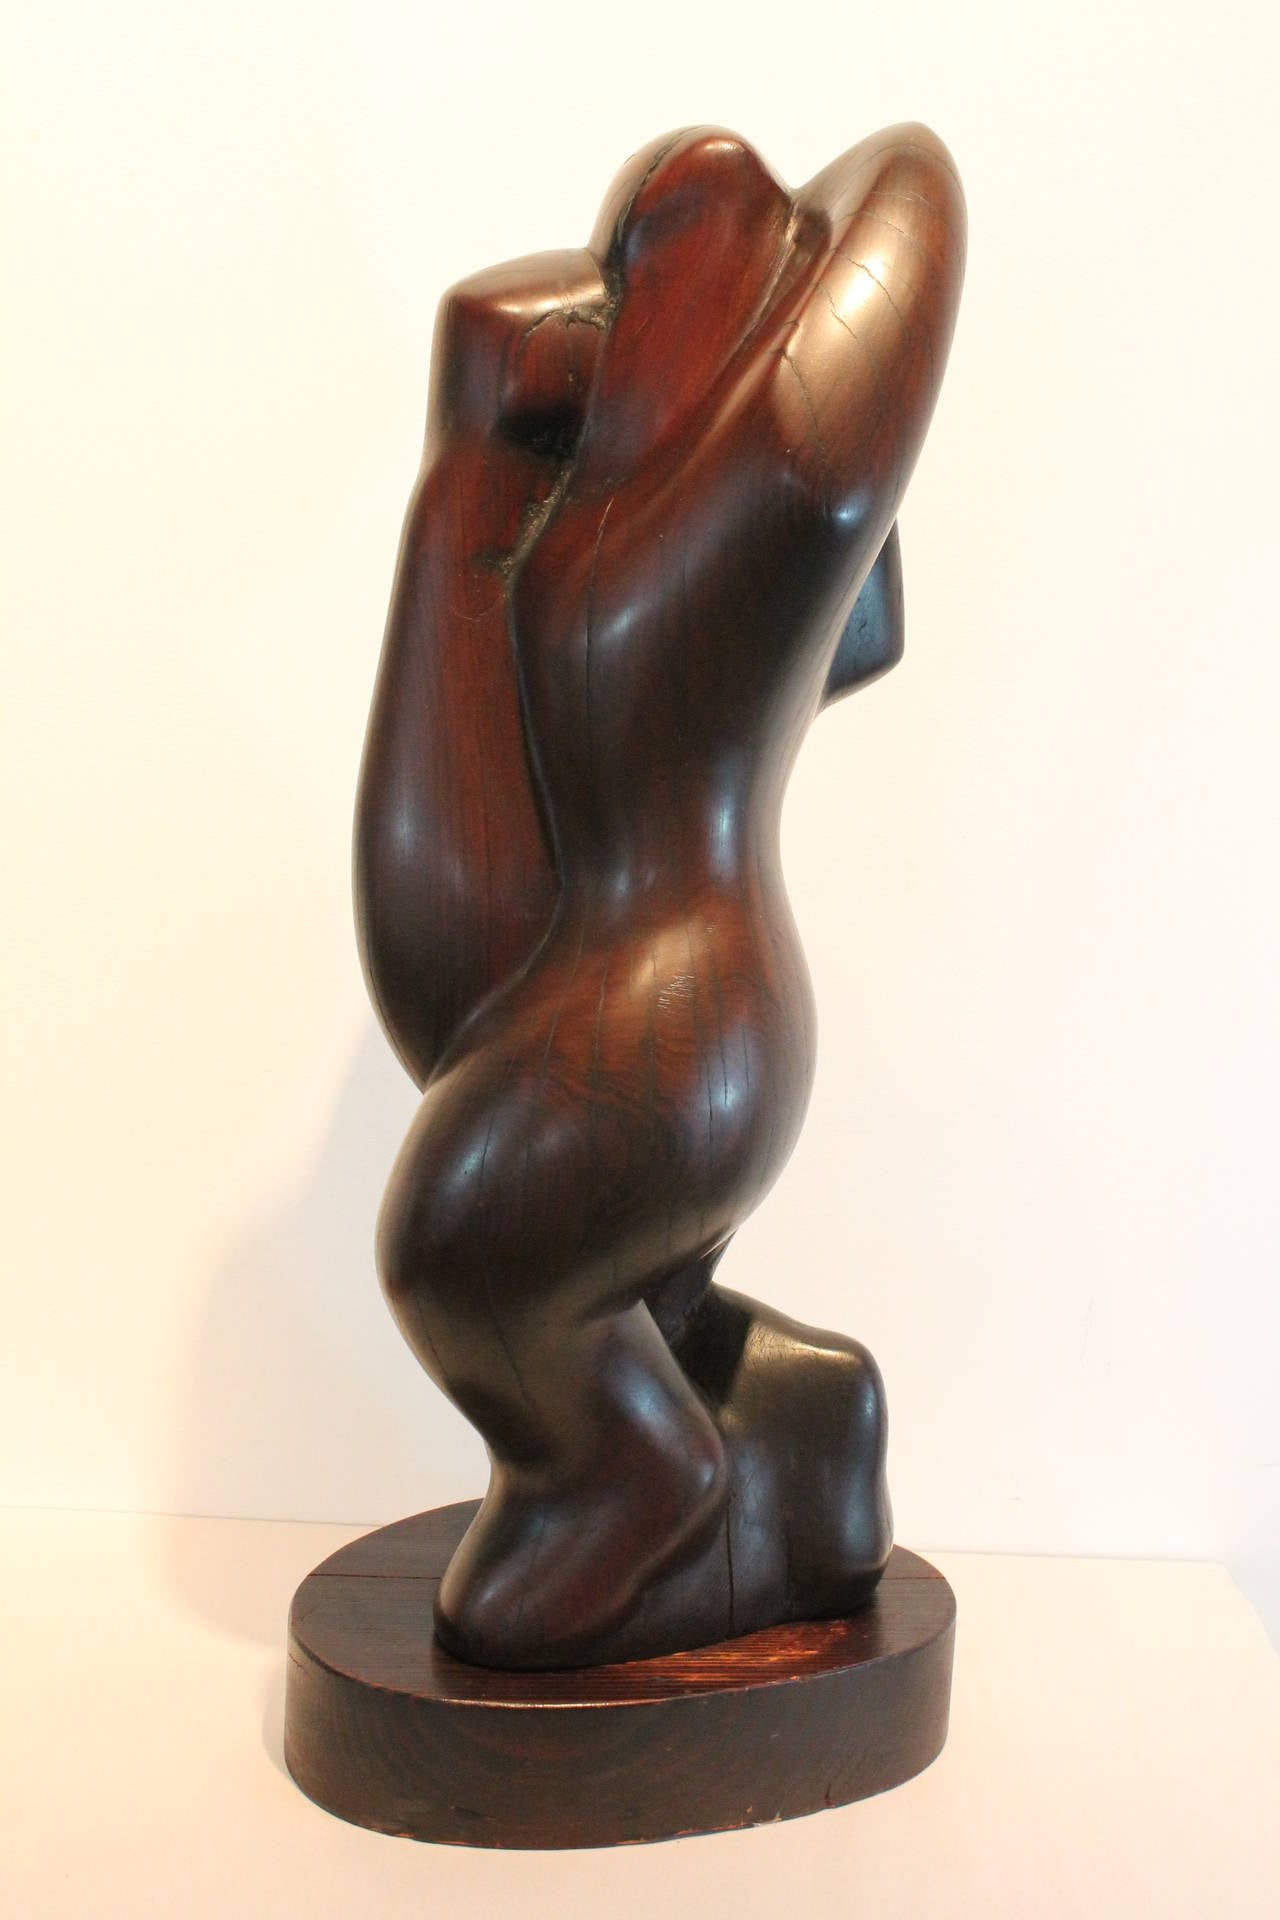 Very strong graphic presence in this French carved minimalist abstracted figurative sculpture. 
Nice large scale.
Excellent from every vantage.
Signed on base.